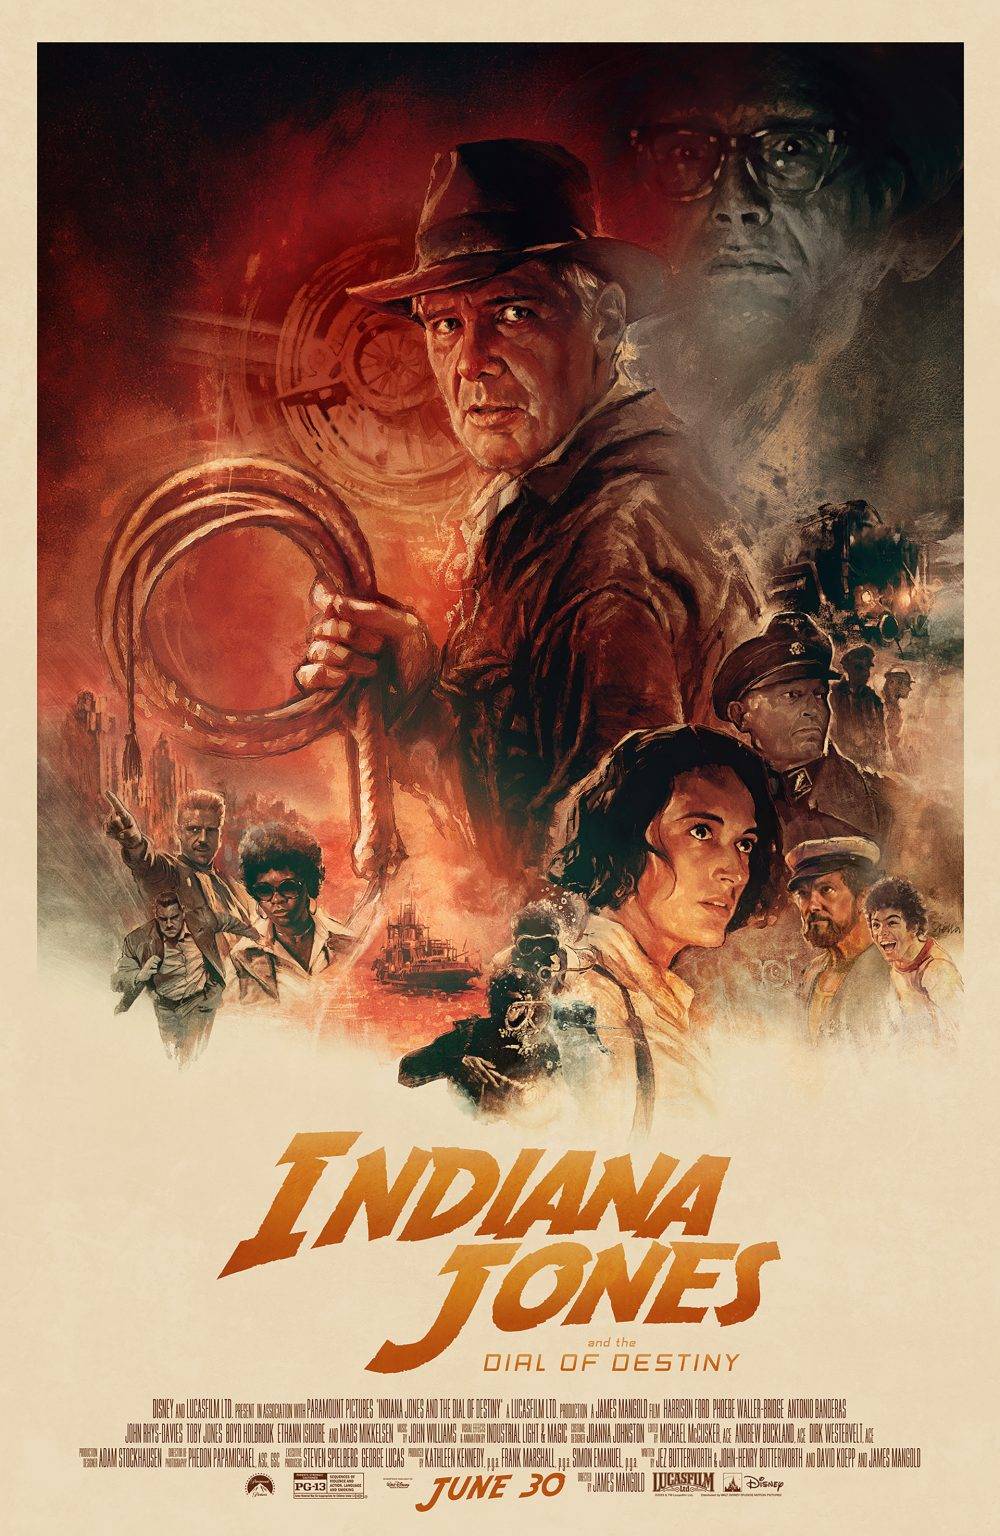 Disney unveils the 'Indiana Jones and the Dial of Destiny' trailer